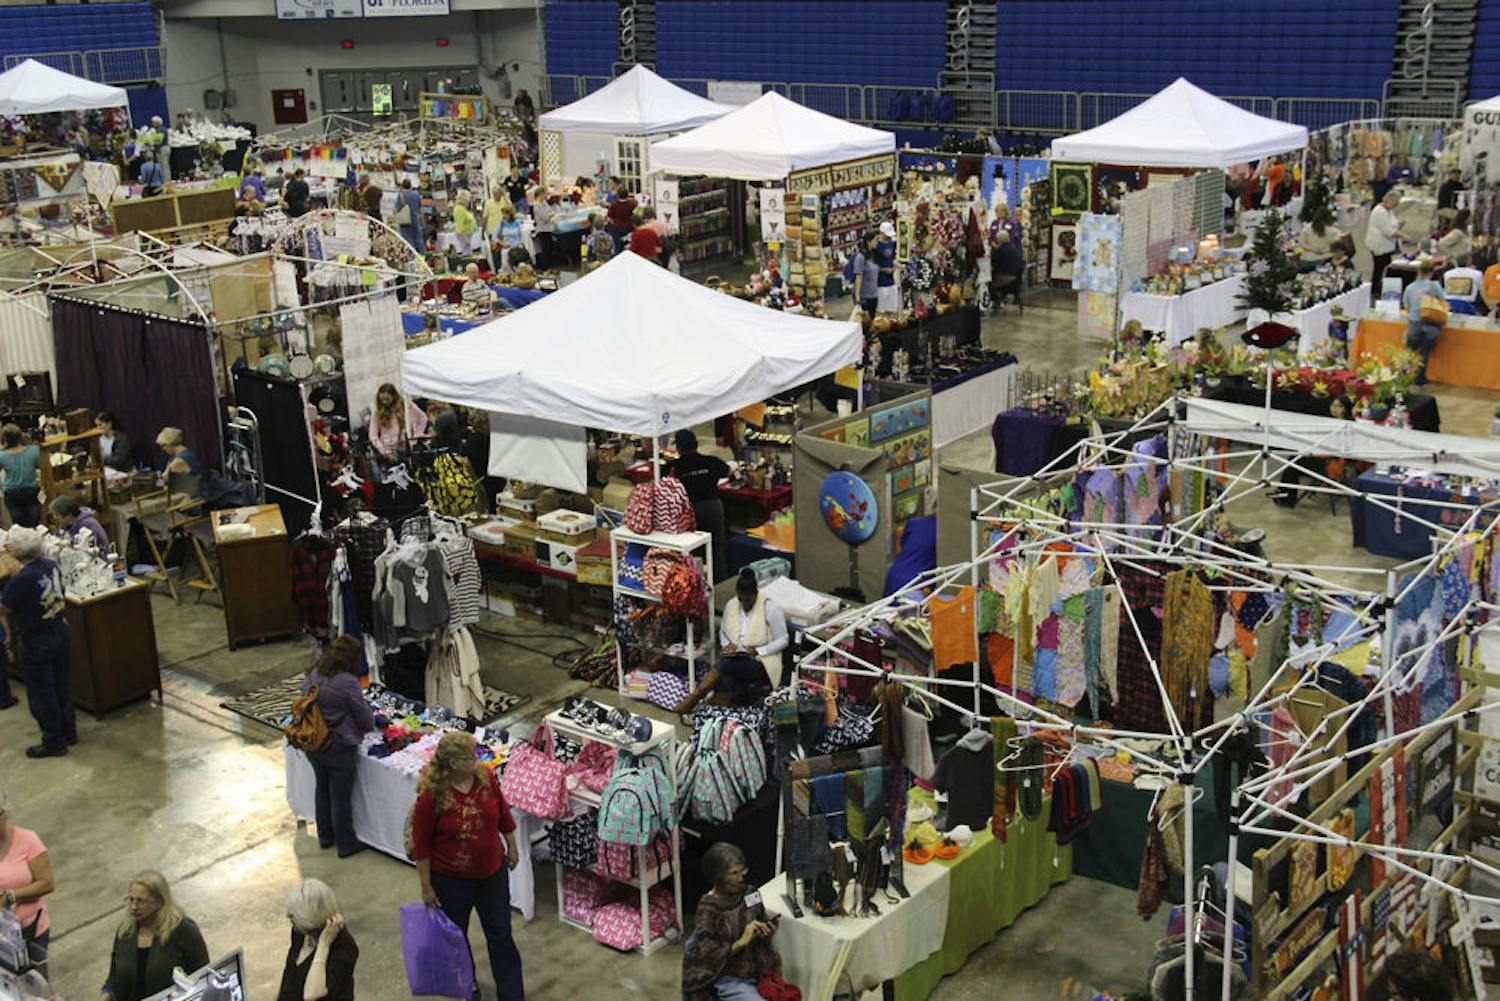 People gather in the O'Connell Center for the 2015 Craft Festival on Dec. 6, 2015.